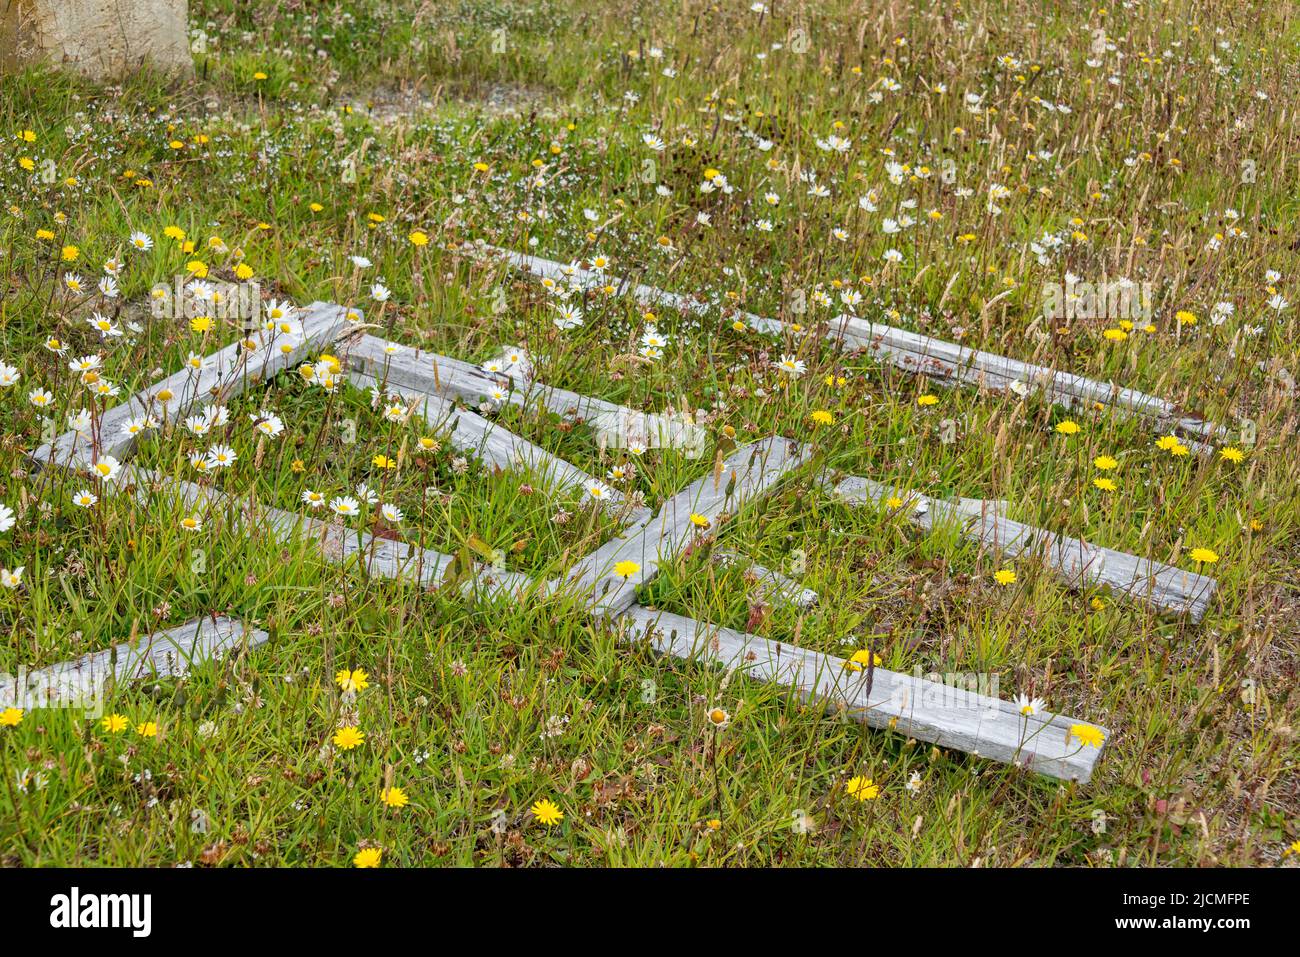 A meadow full of little yellow flowers with some wood boards from an old fence laying on the ground. Patagonia, Argentina. Stock Photo